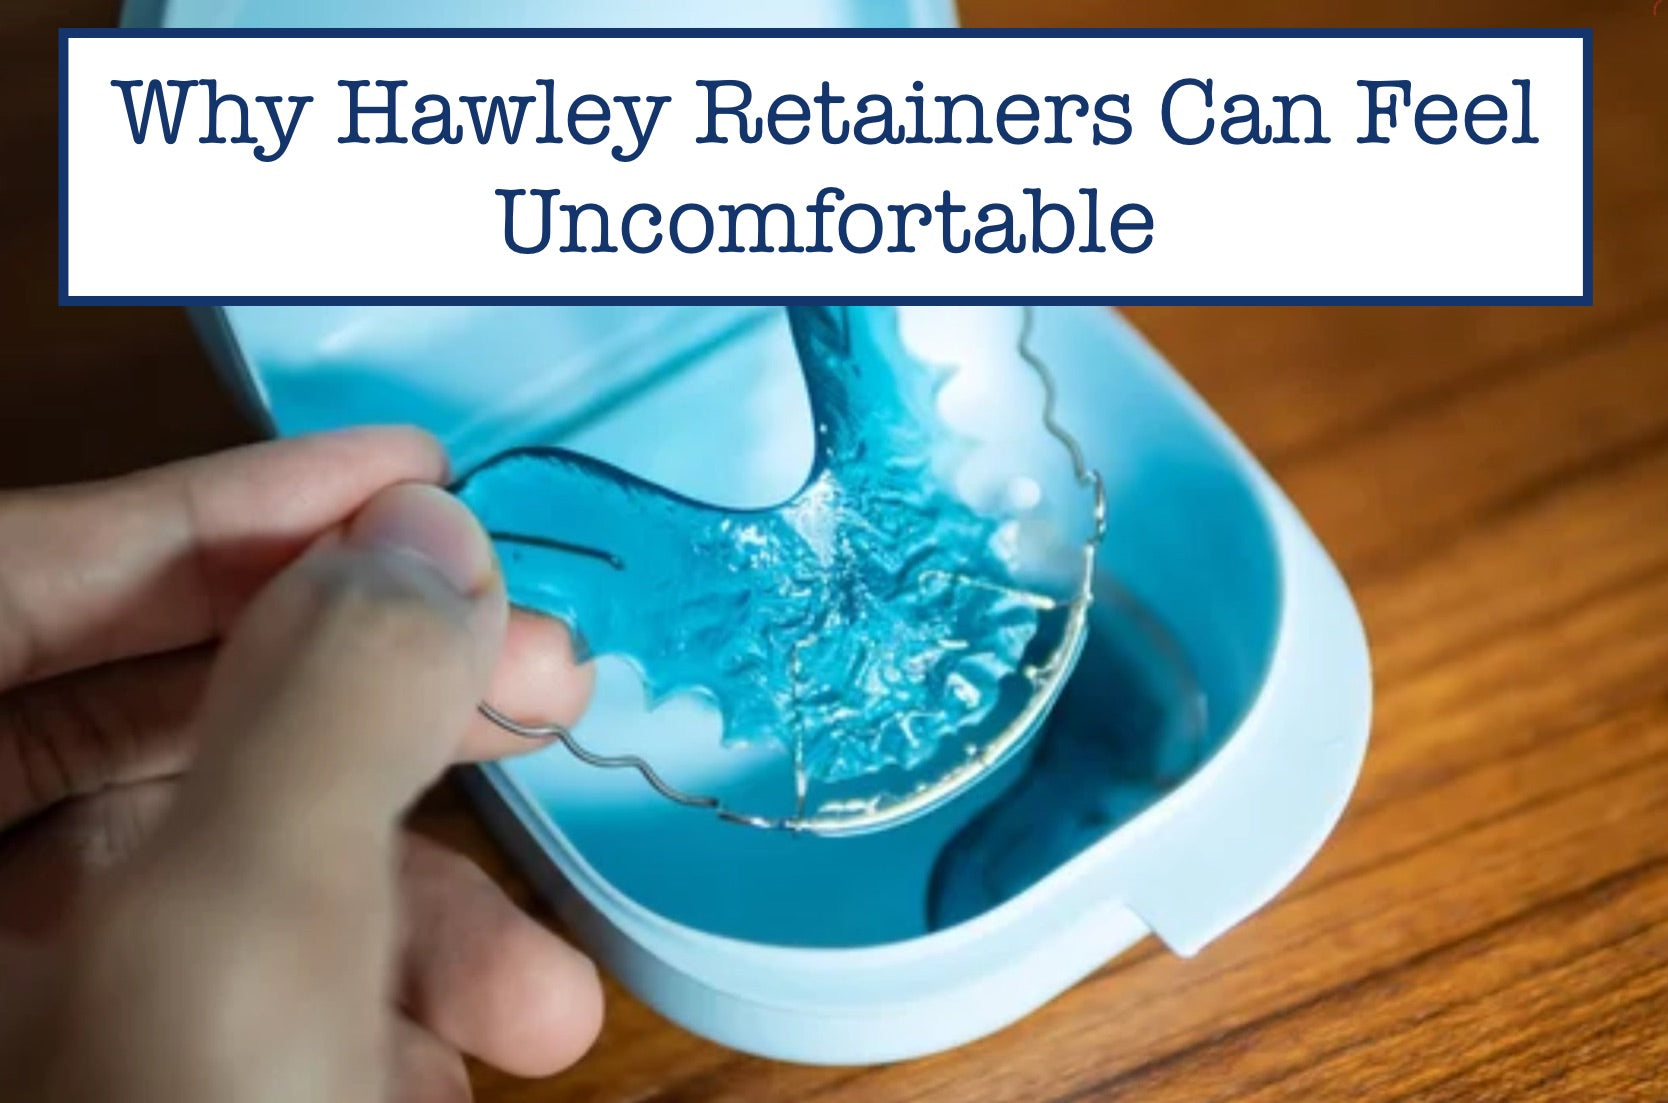 Why Hawley Retainers Can Feel Uncomfortable